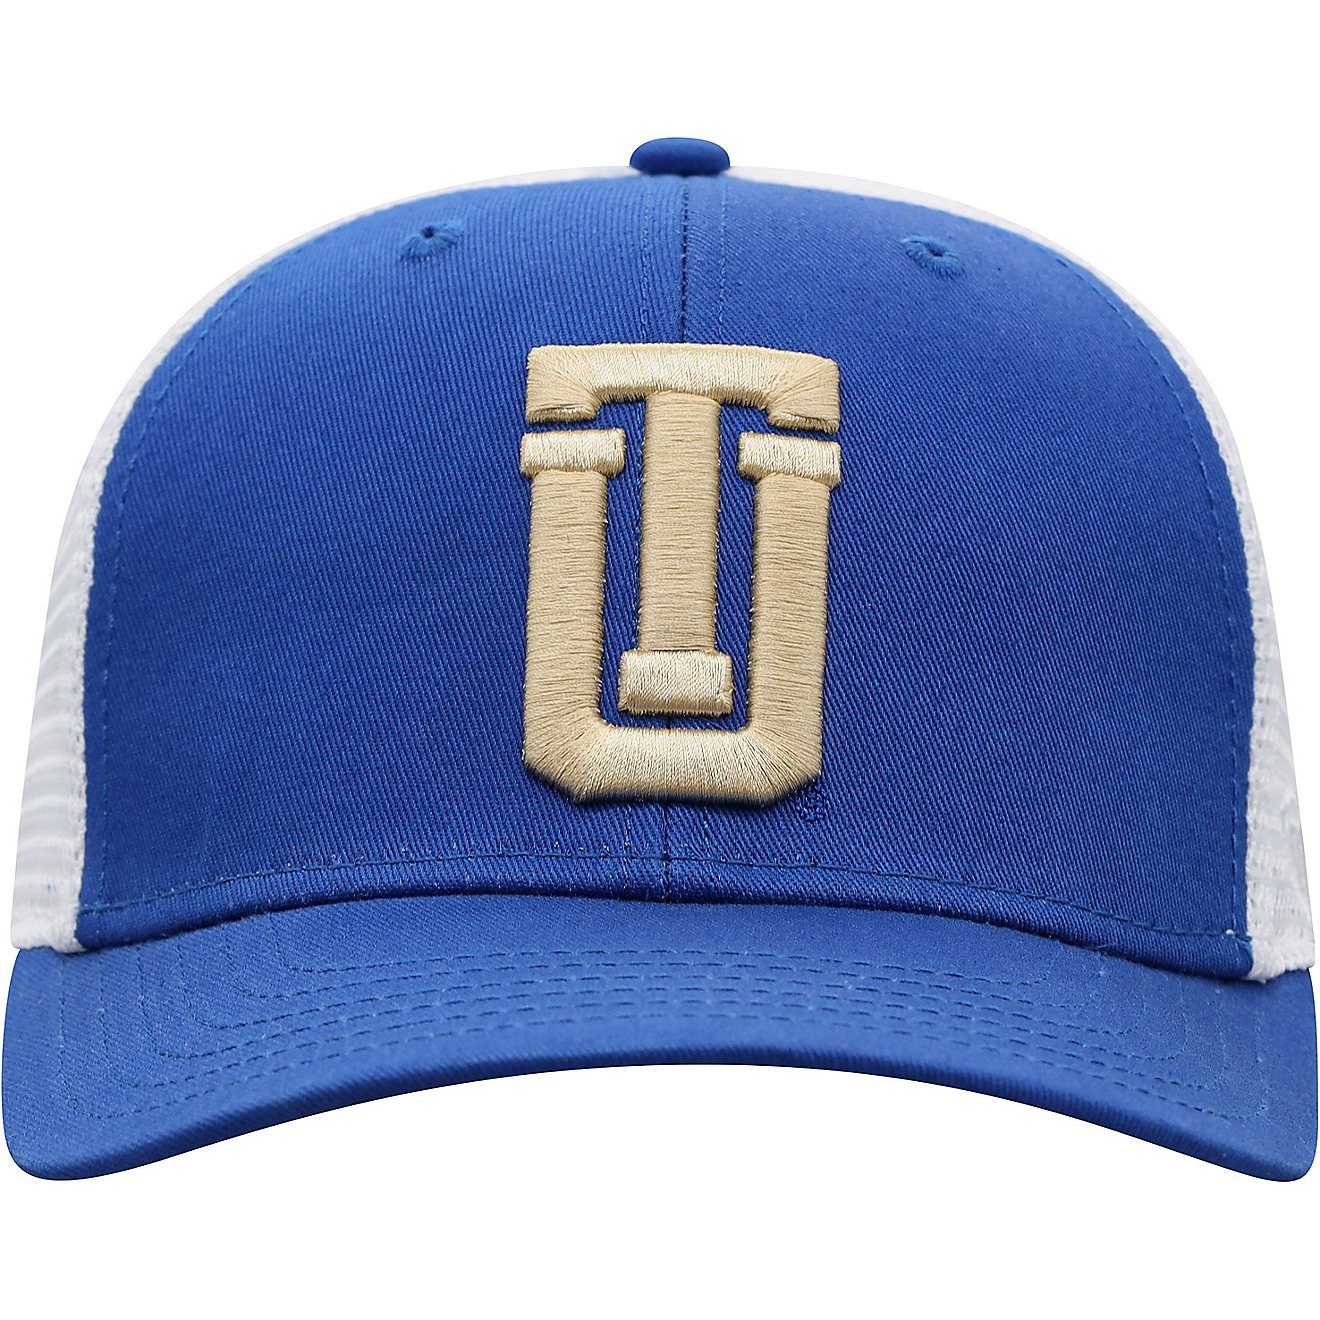 Top of The World Adults' University of Tulsa BB 2-Tone Adjustable Cap                                                            - view number 3